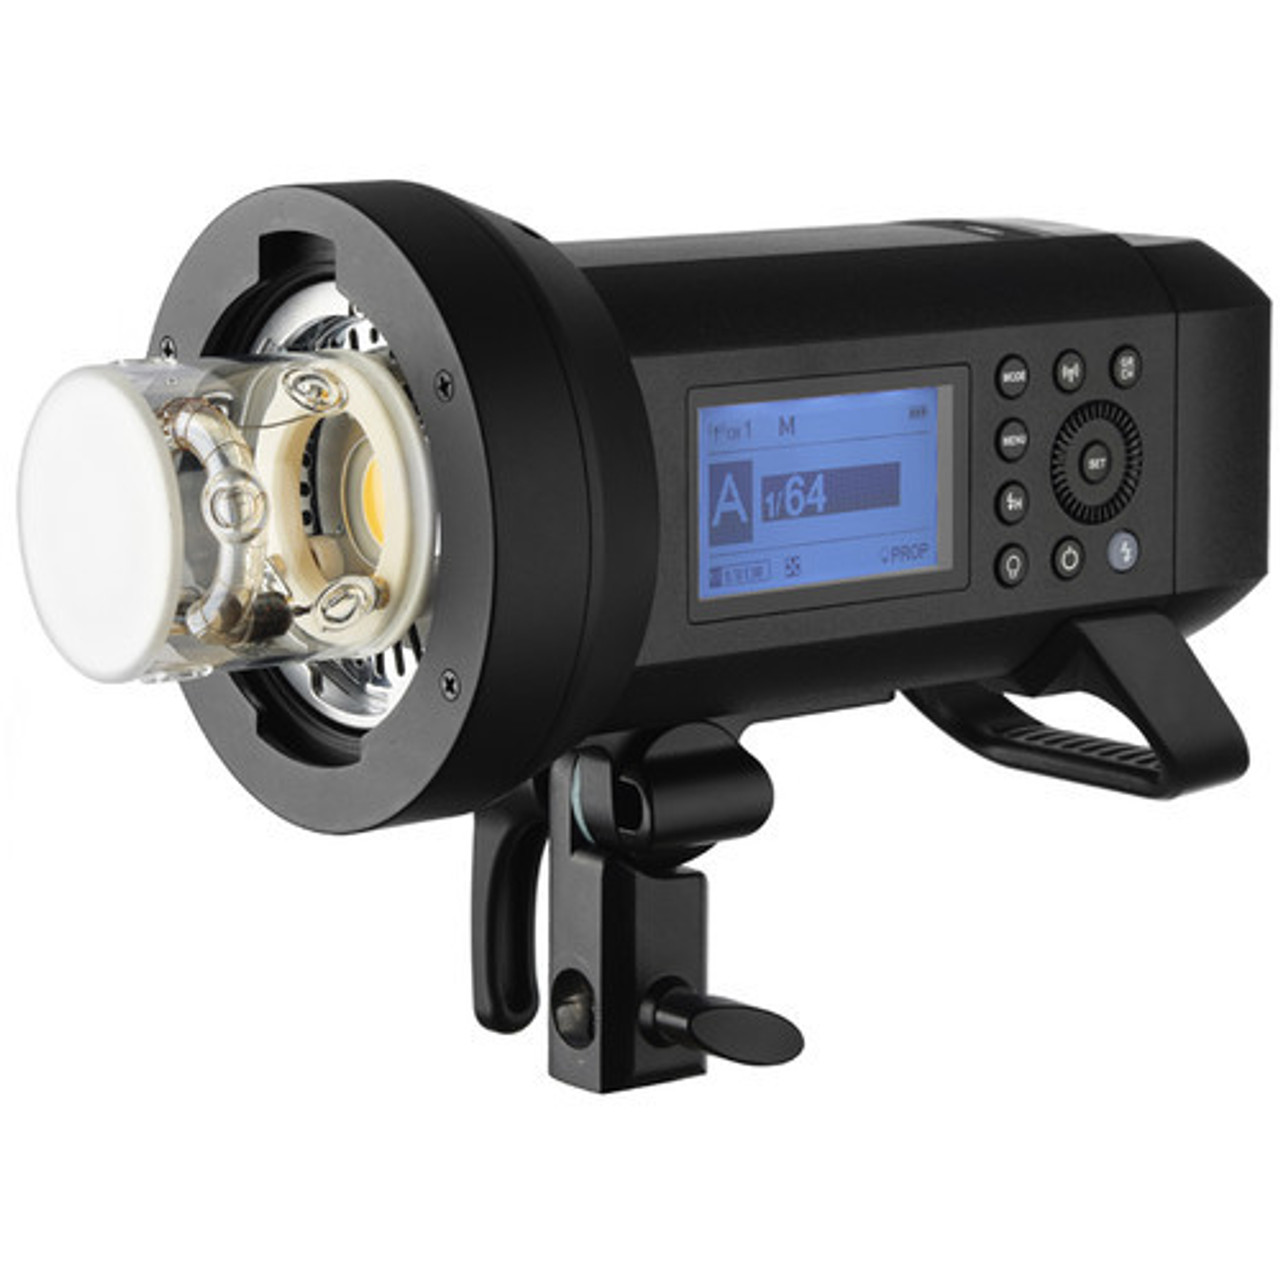 Godox AD300Pro All-in-One Outdoor Flash for sale online